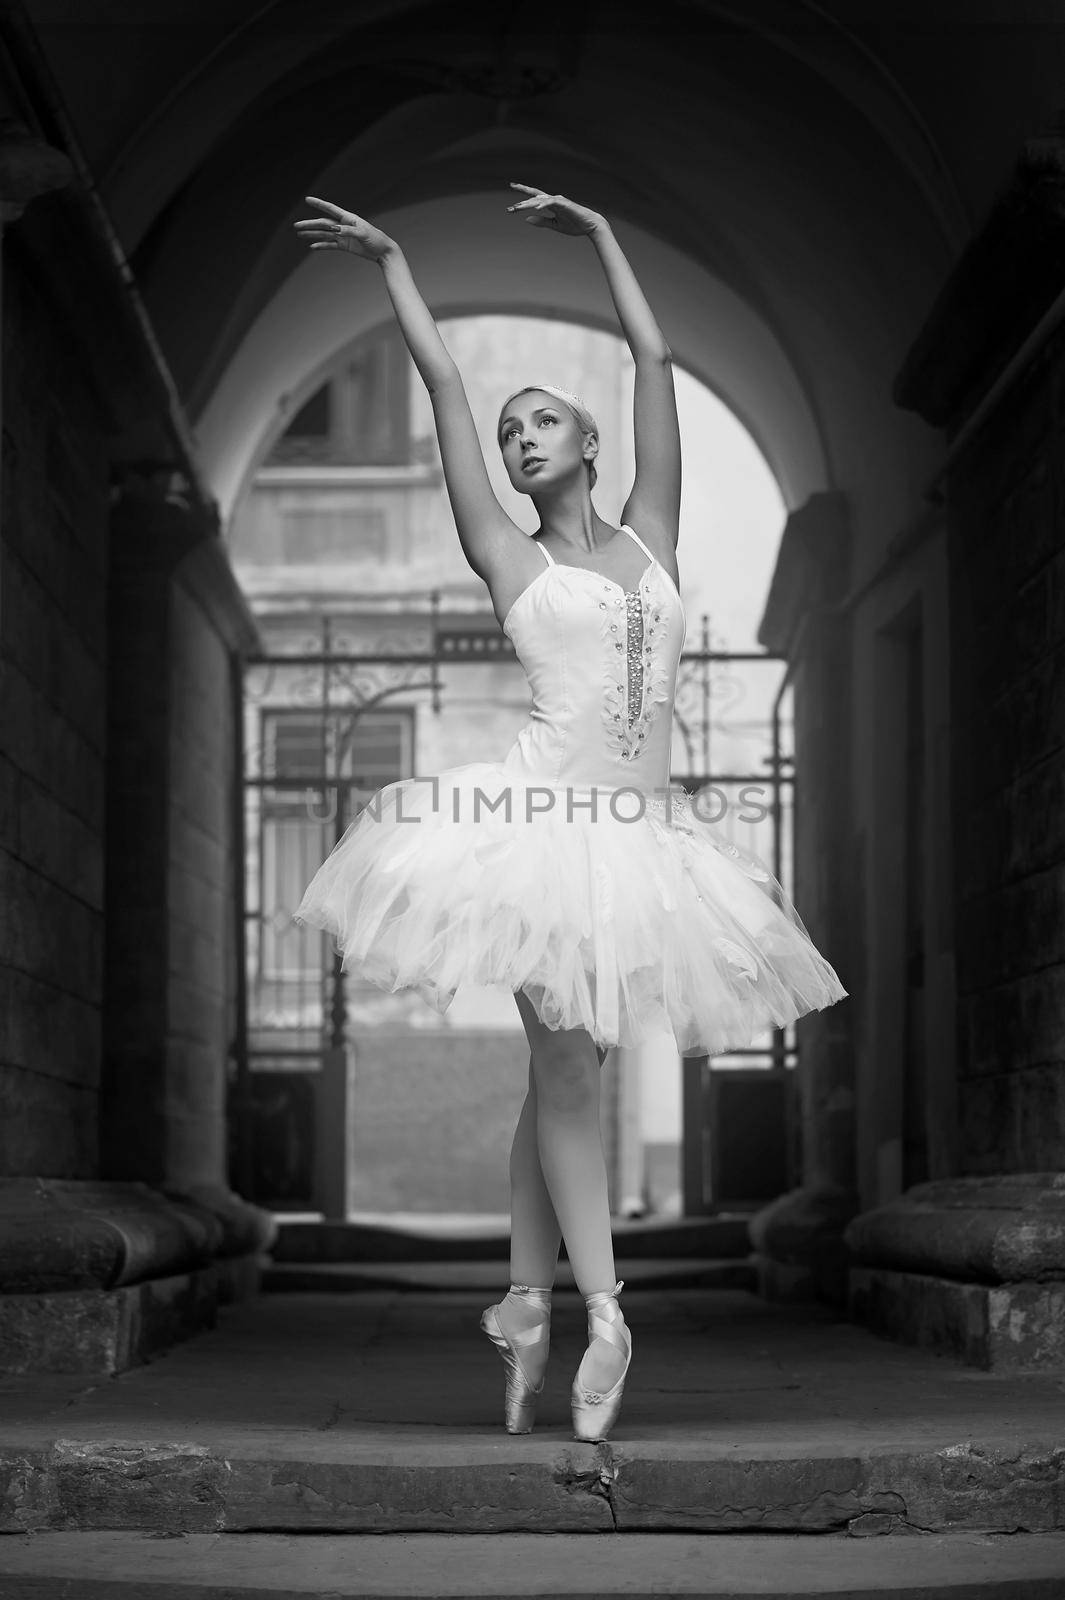 Dreaming big. Monochrome soft focus shot of a graceful ballerina posing looking away dreamily